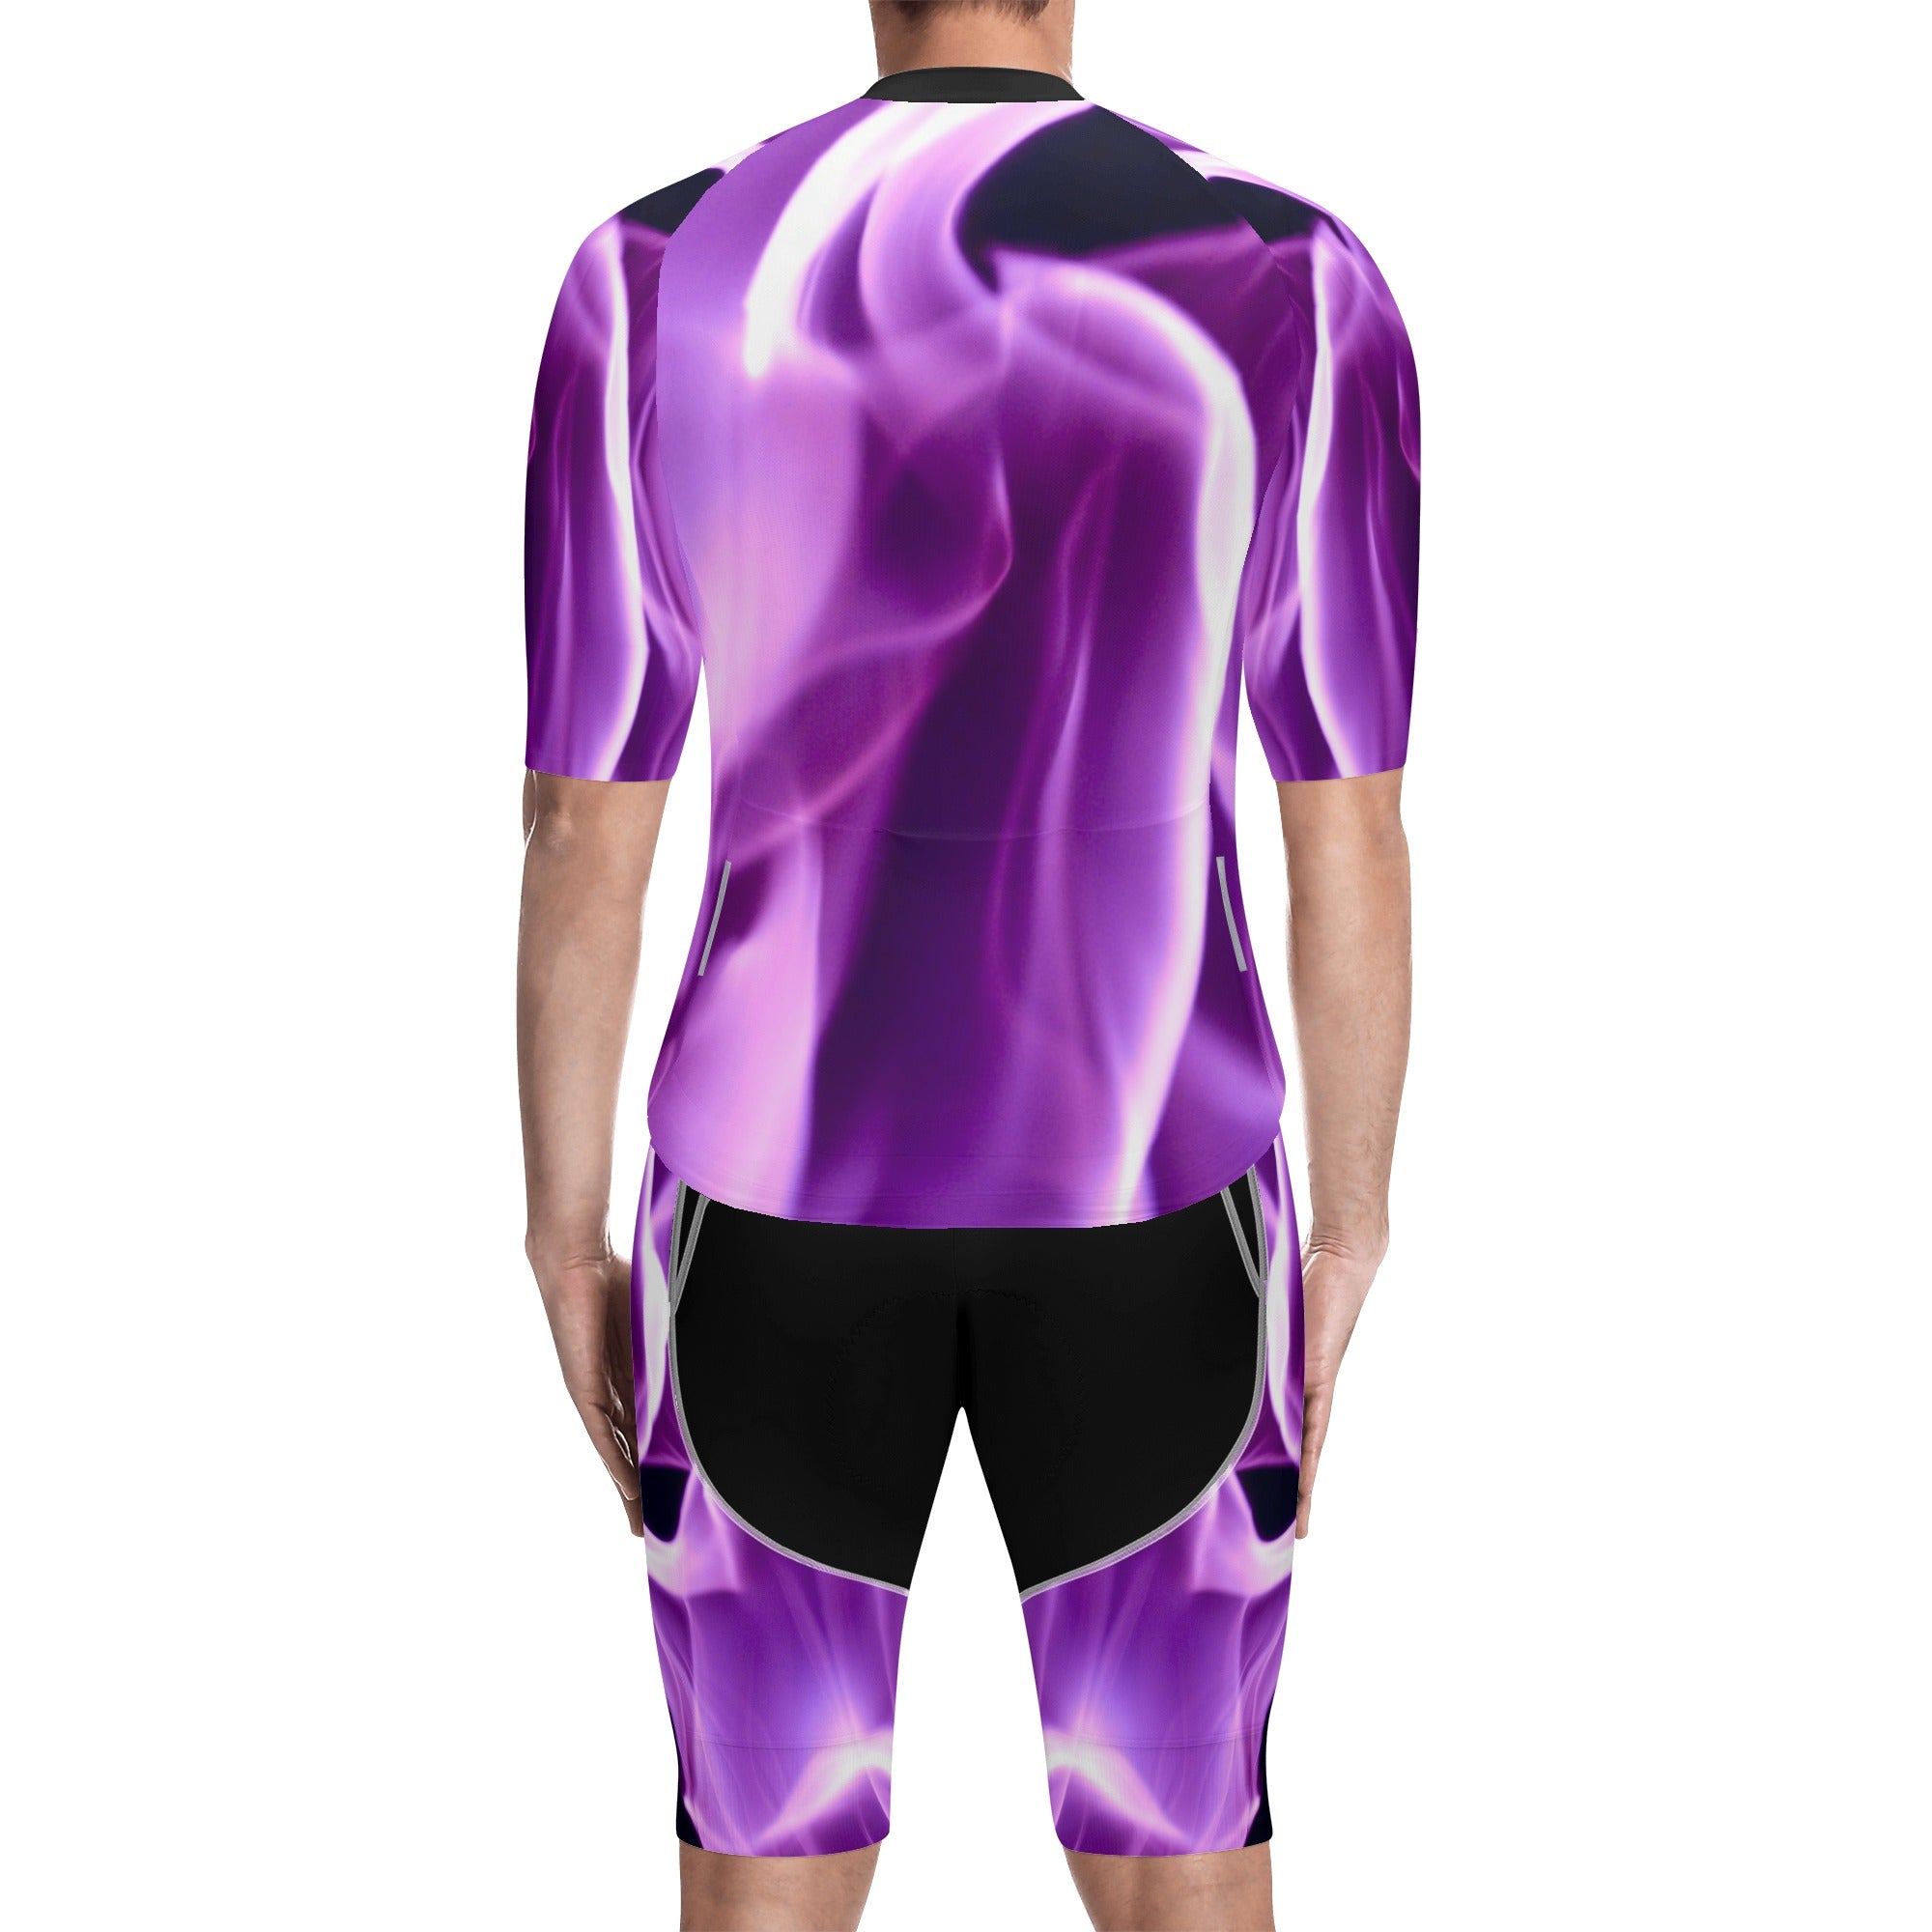 MENS LYCRA MTB JERSEY AND SHORTS | BLUE FLAME | XS - 2XL - Single Track Dreamer